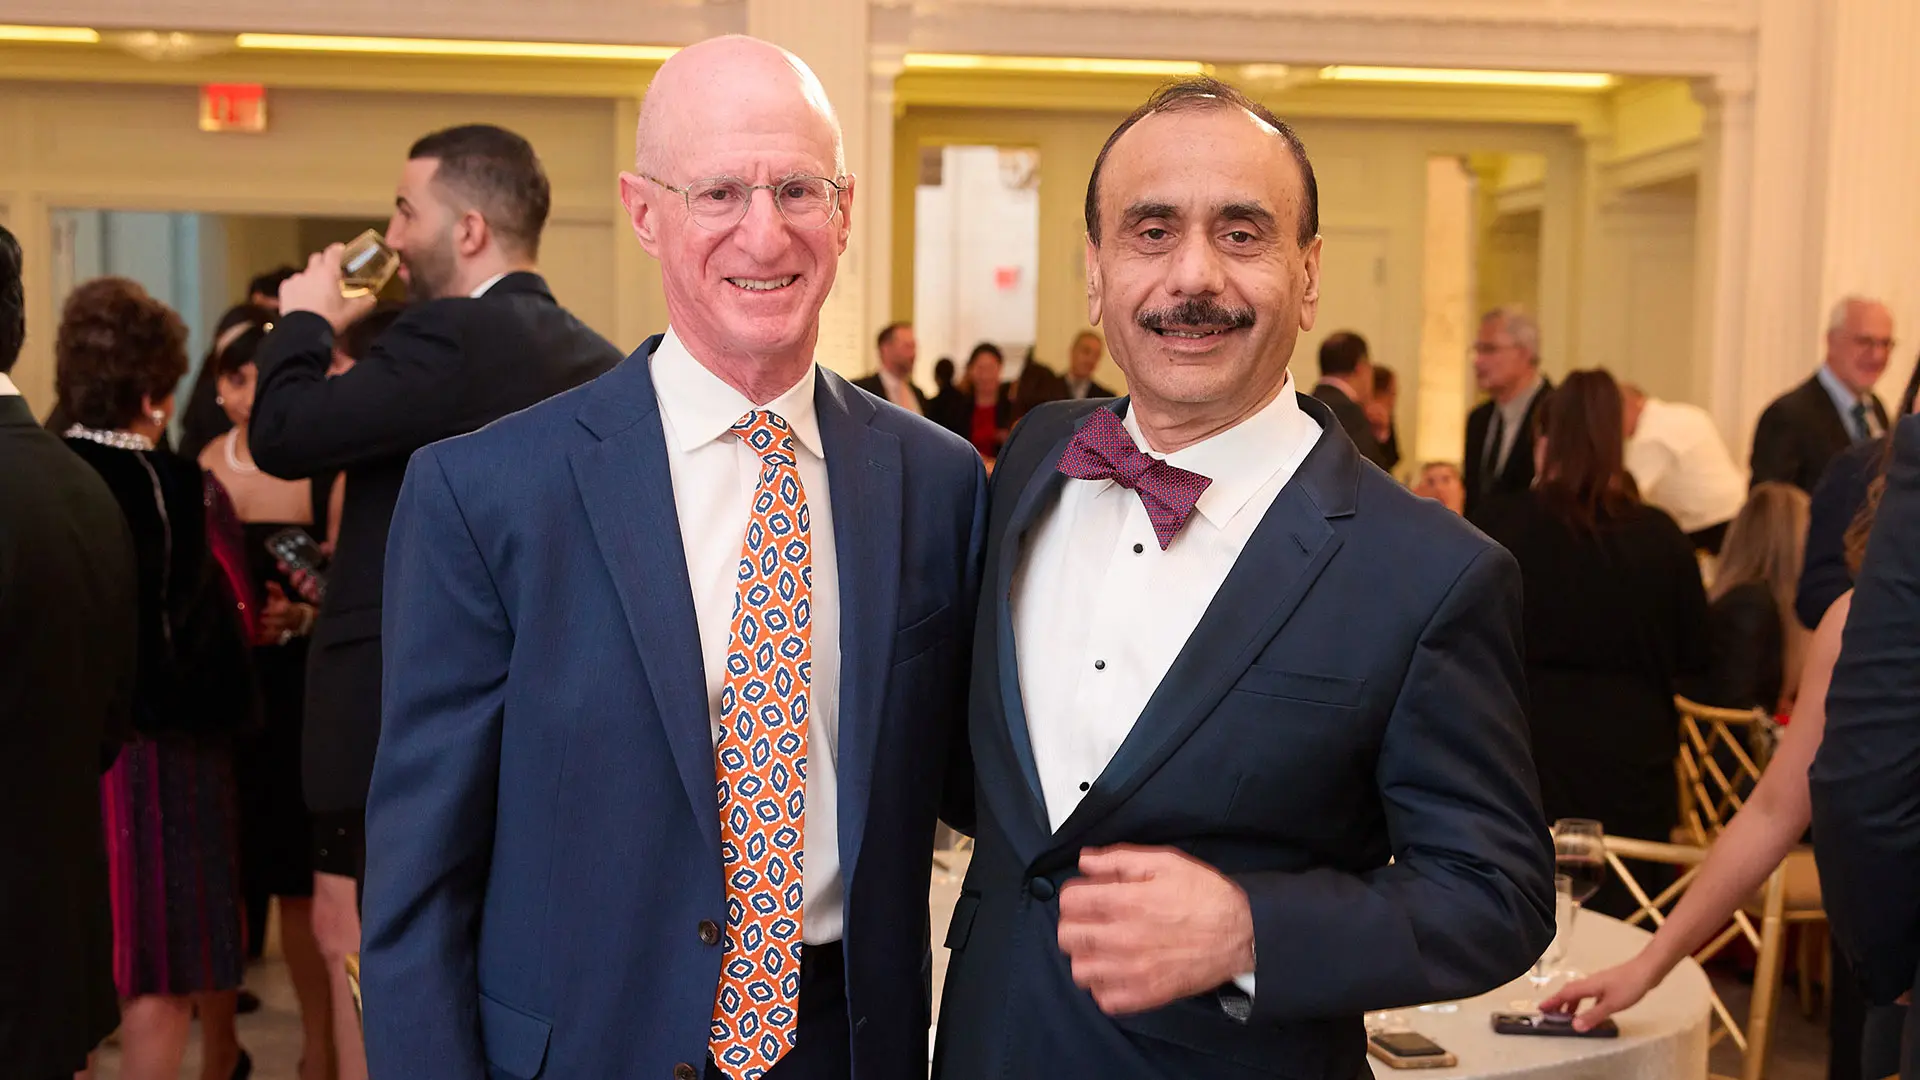 At the gala, James Tisch, left, Co-Chairman of the Boards of Trustees of the Mount Sinai Health System, and Ash Tewari, MBBS, MCh, FRCS (Hon.)